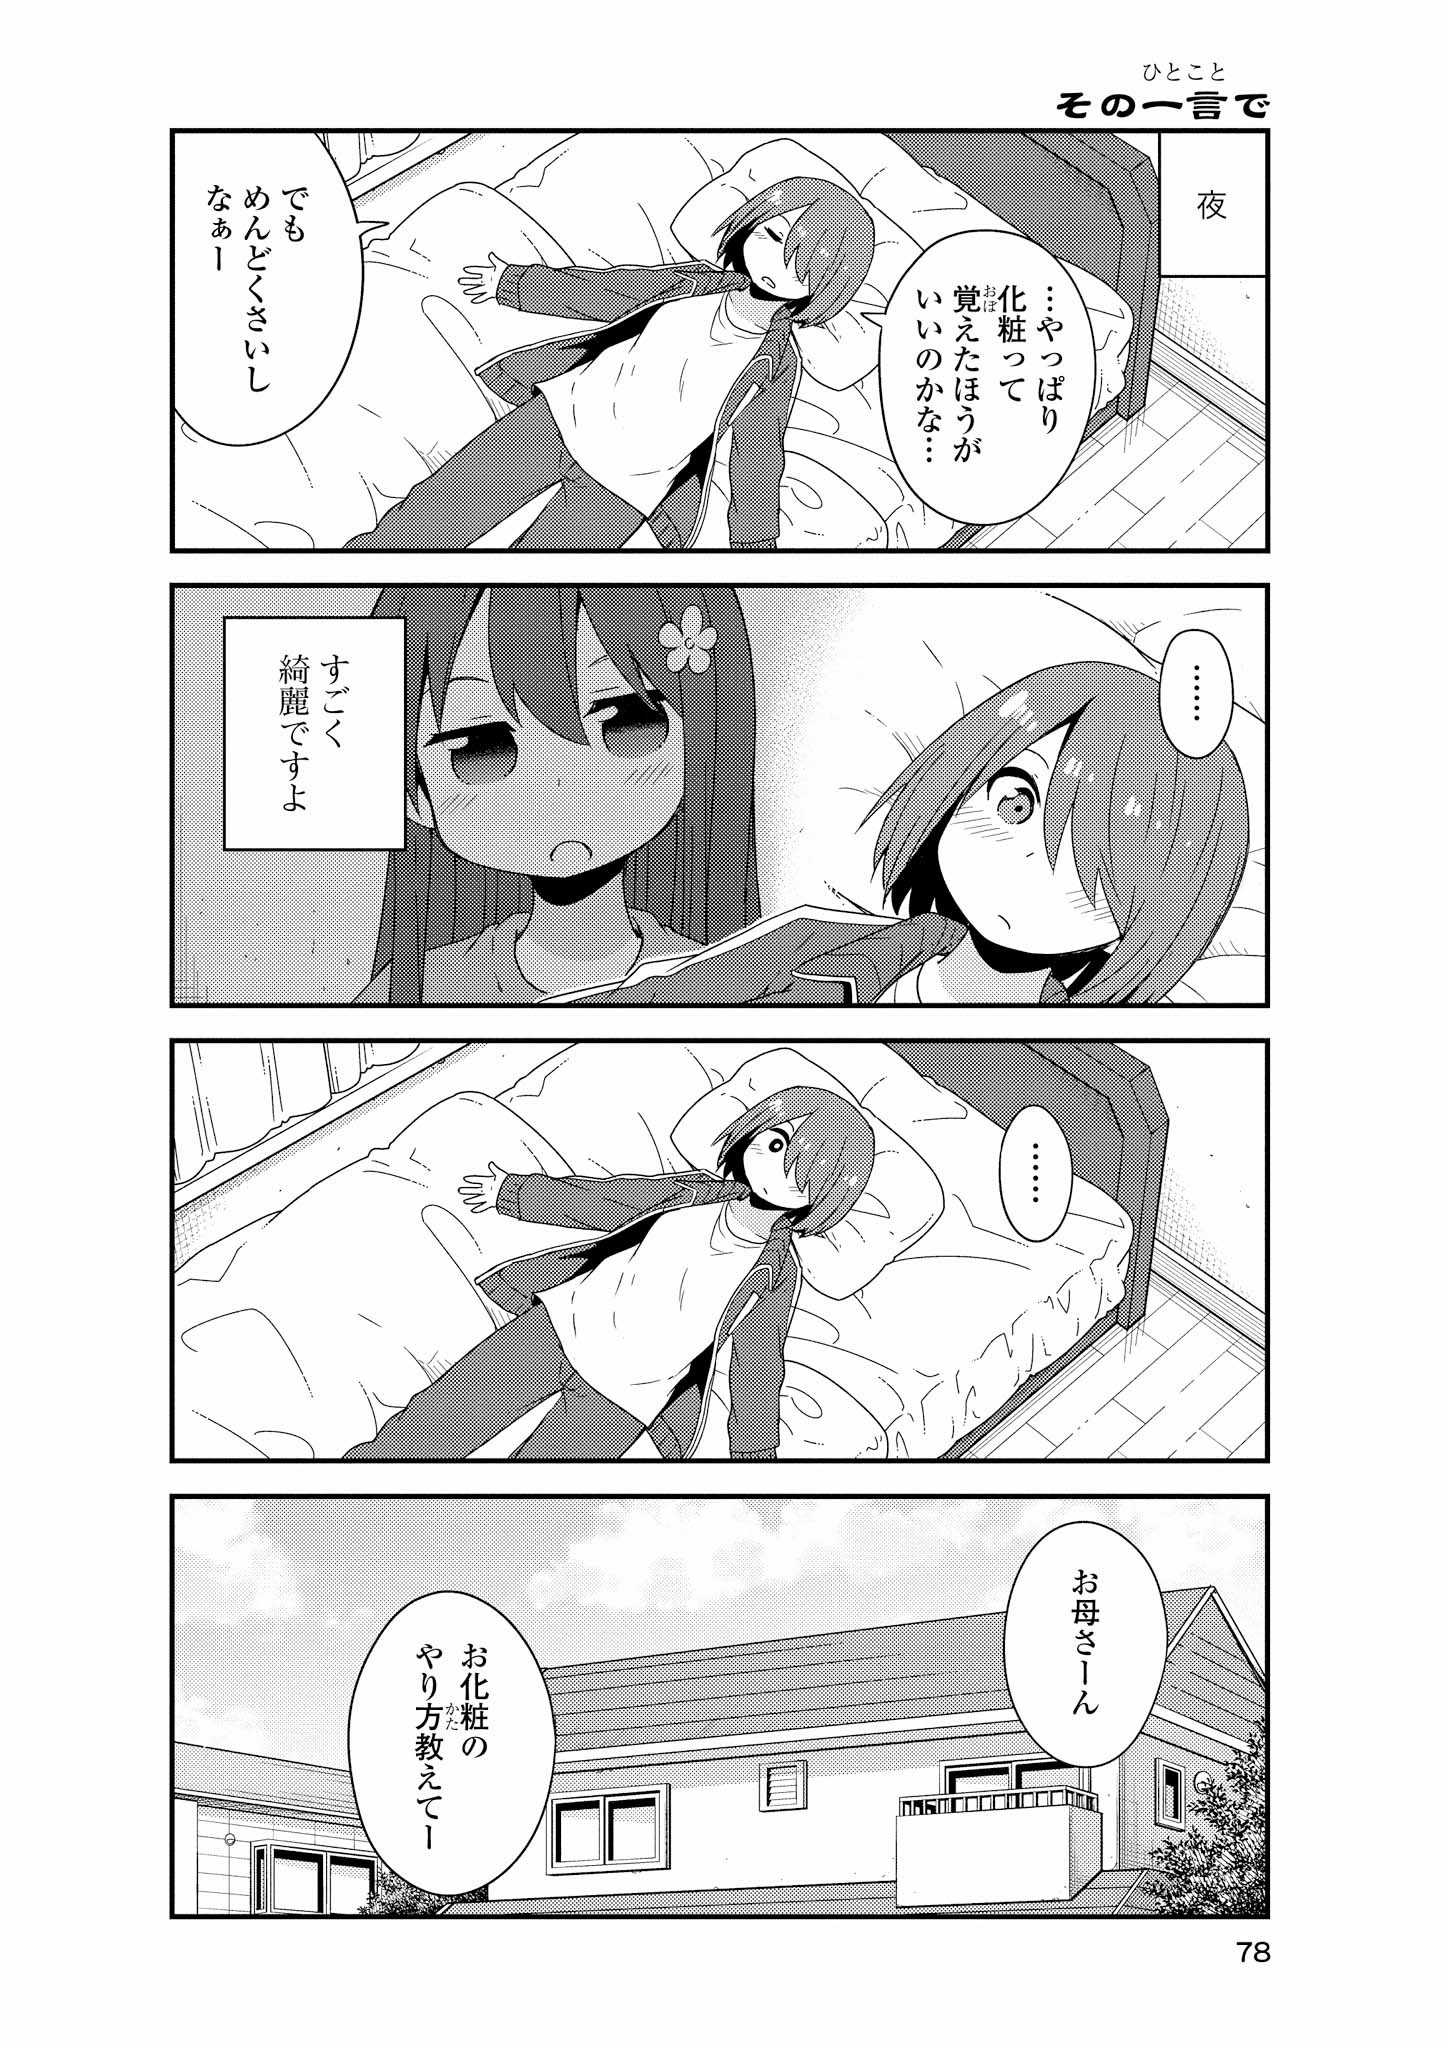 Wataten! An Angel Flew Down to Me 私に天使が舞い降りた！ 第40話 - Page 16